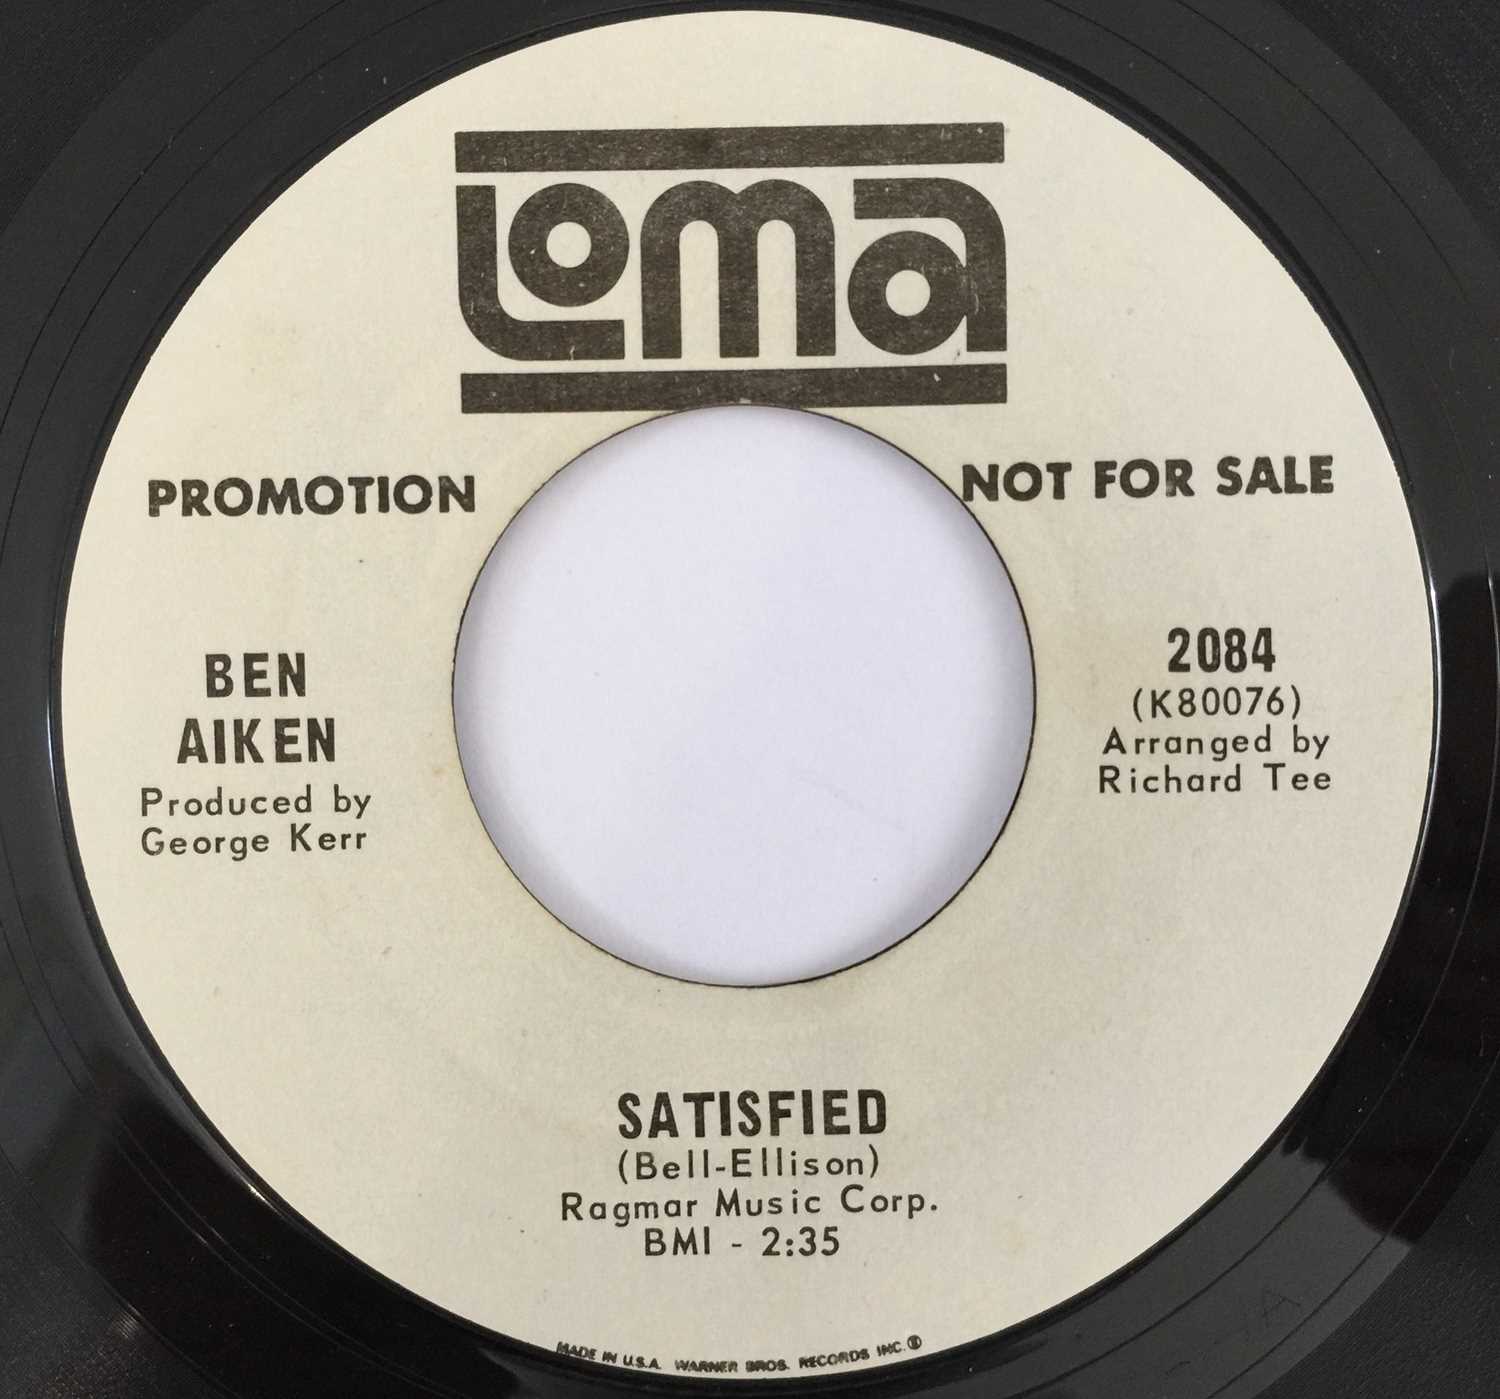 Lot 9 - BEN AIKEN - SATISFIED/ THE LIFE OF A CLOWN 7" (US PROMO - LOMA 2084)